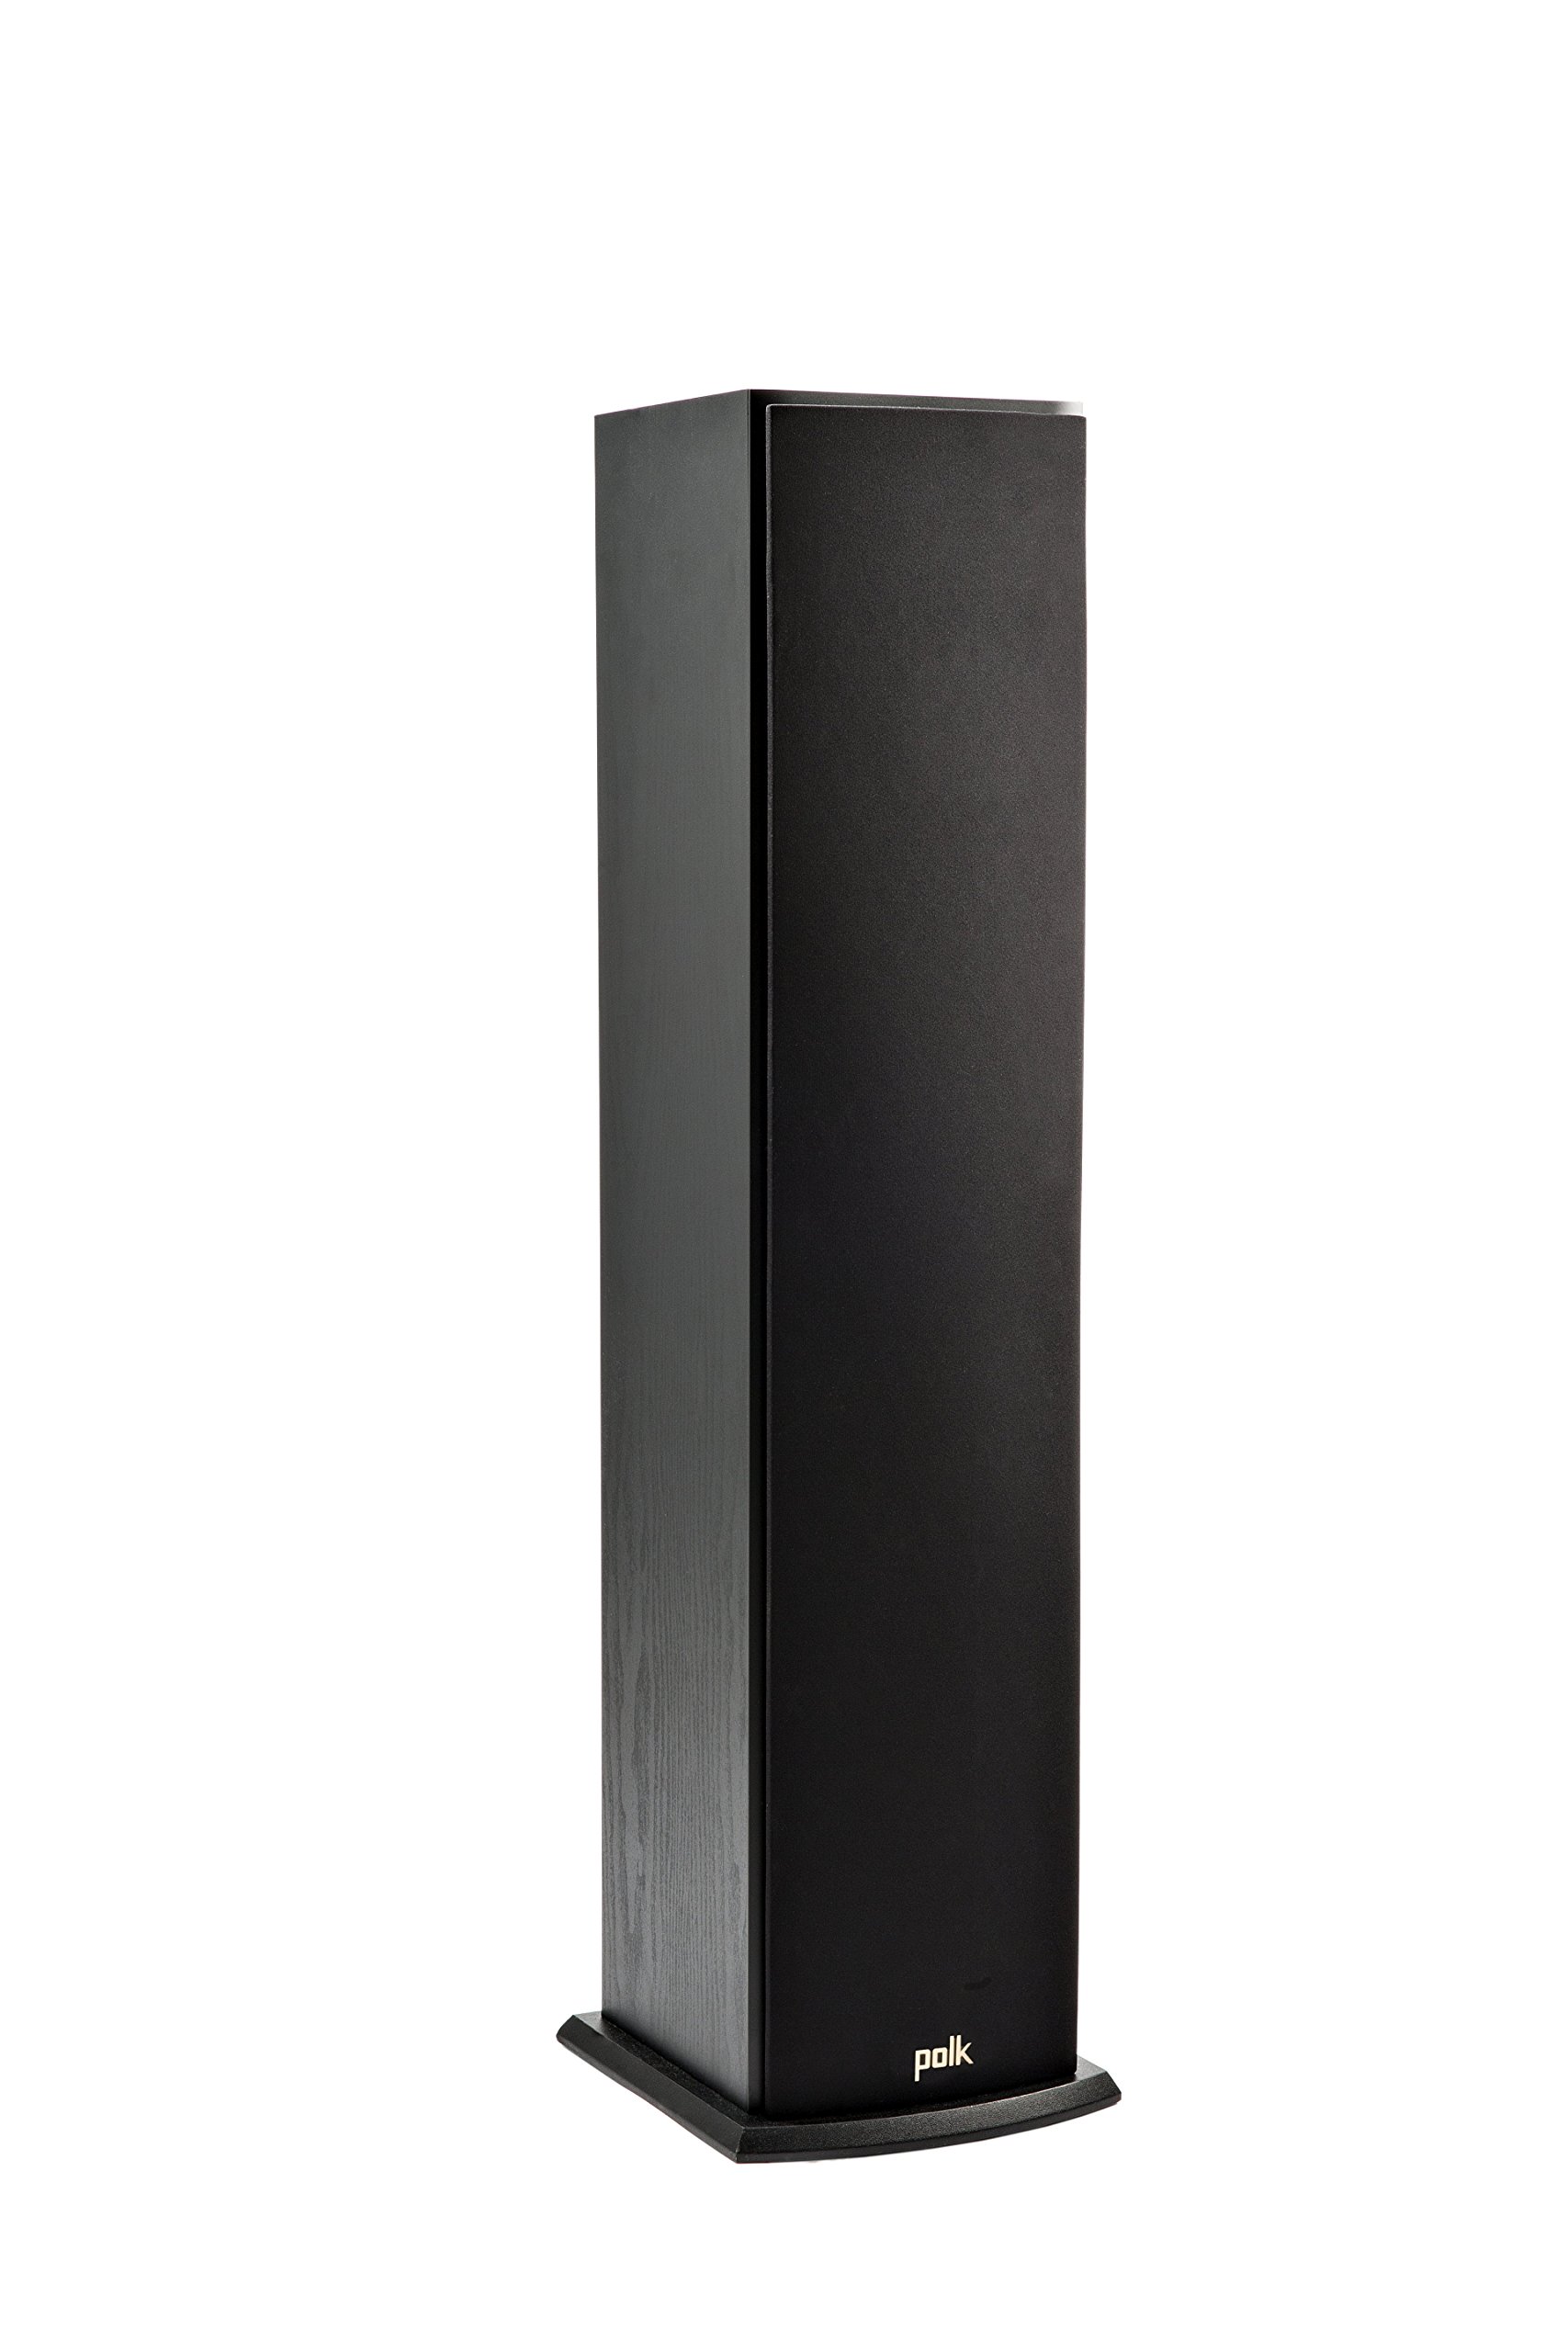 Polk Audio T50 150 Watt Home Theater Floor Standing Tower Speaker (Single) - Amazing Sound | Dolby and DTS Surround,Black, 9.25 x 8.75 x 36.5 Inches